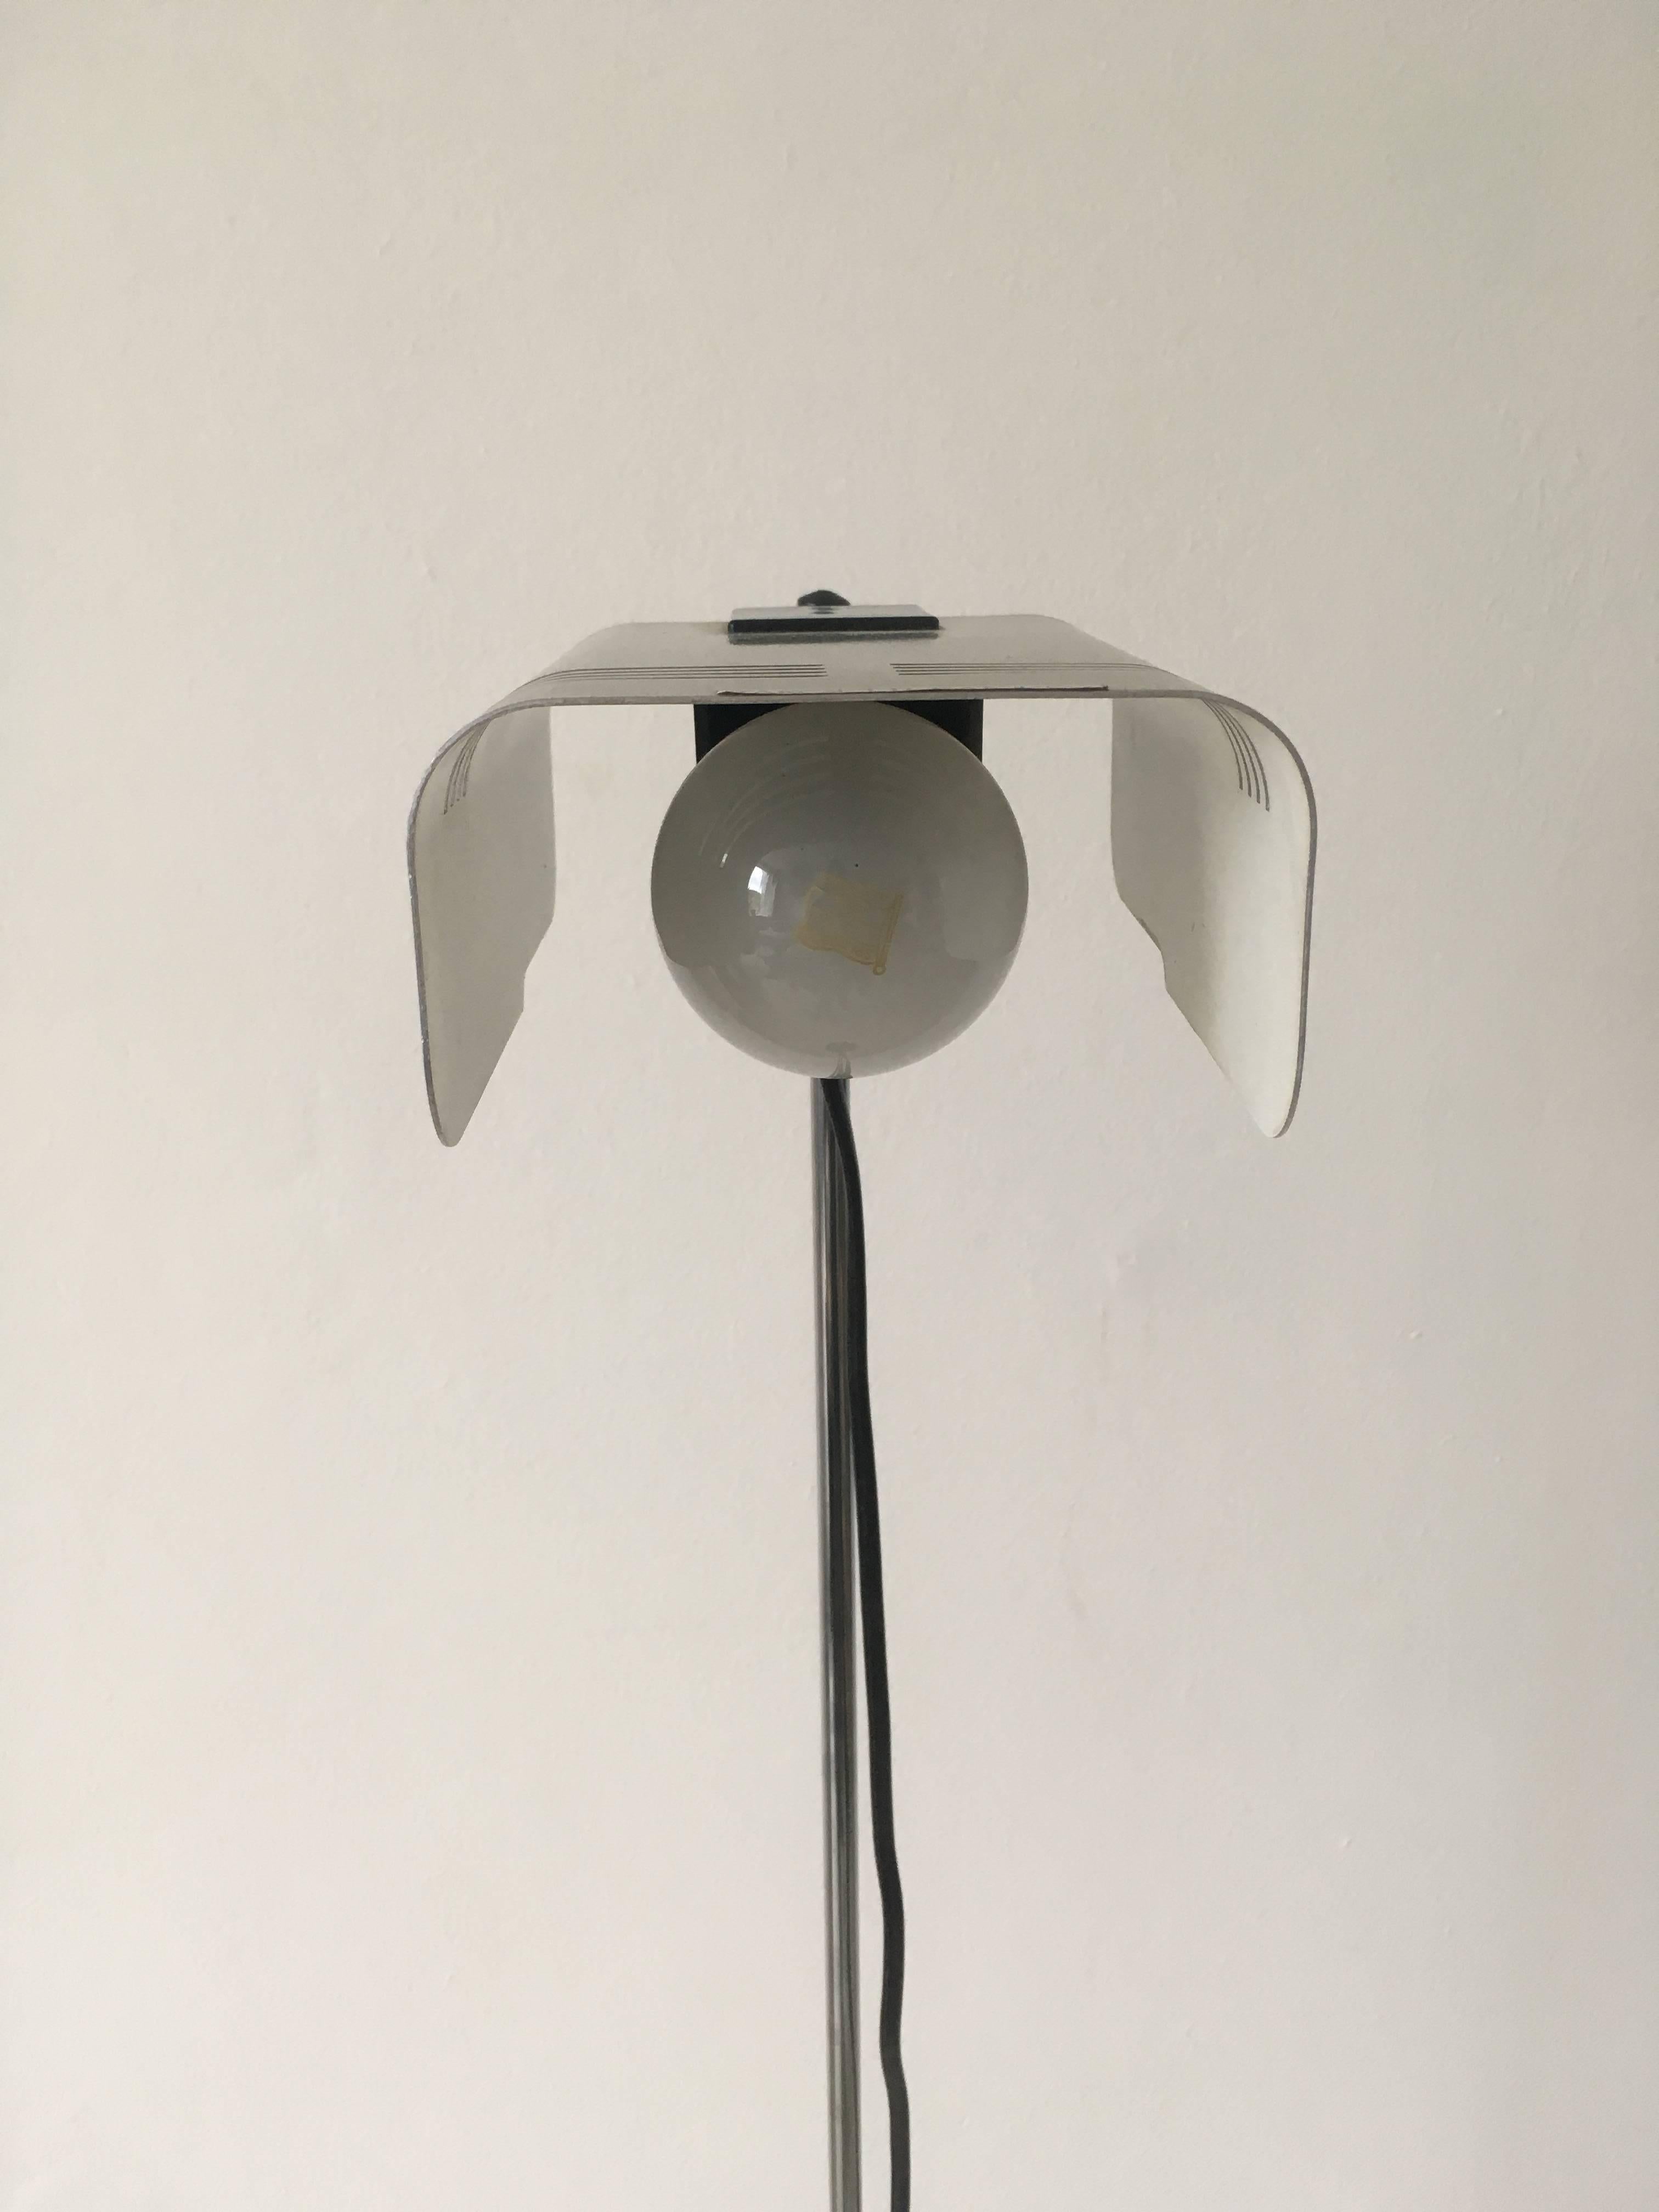 This wonderful Italian design is adjustable in height. It features a chrome plated metal body and a small brushed shade. Fits well in a modern, Industrial or minimalistic designed home. The lamp is signed and is in a very good condition, with